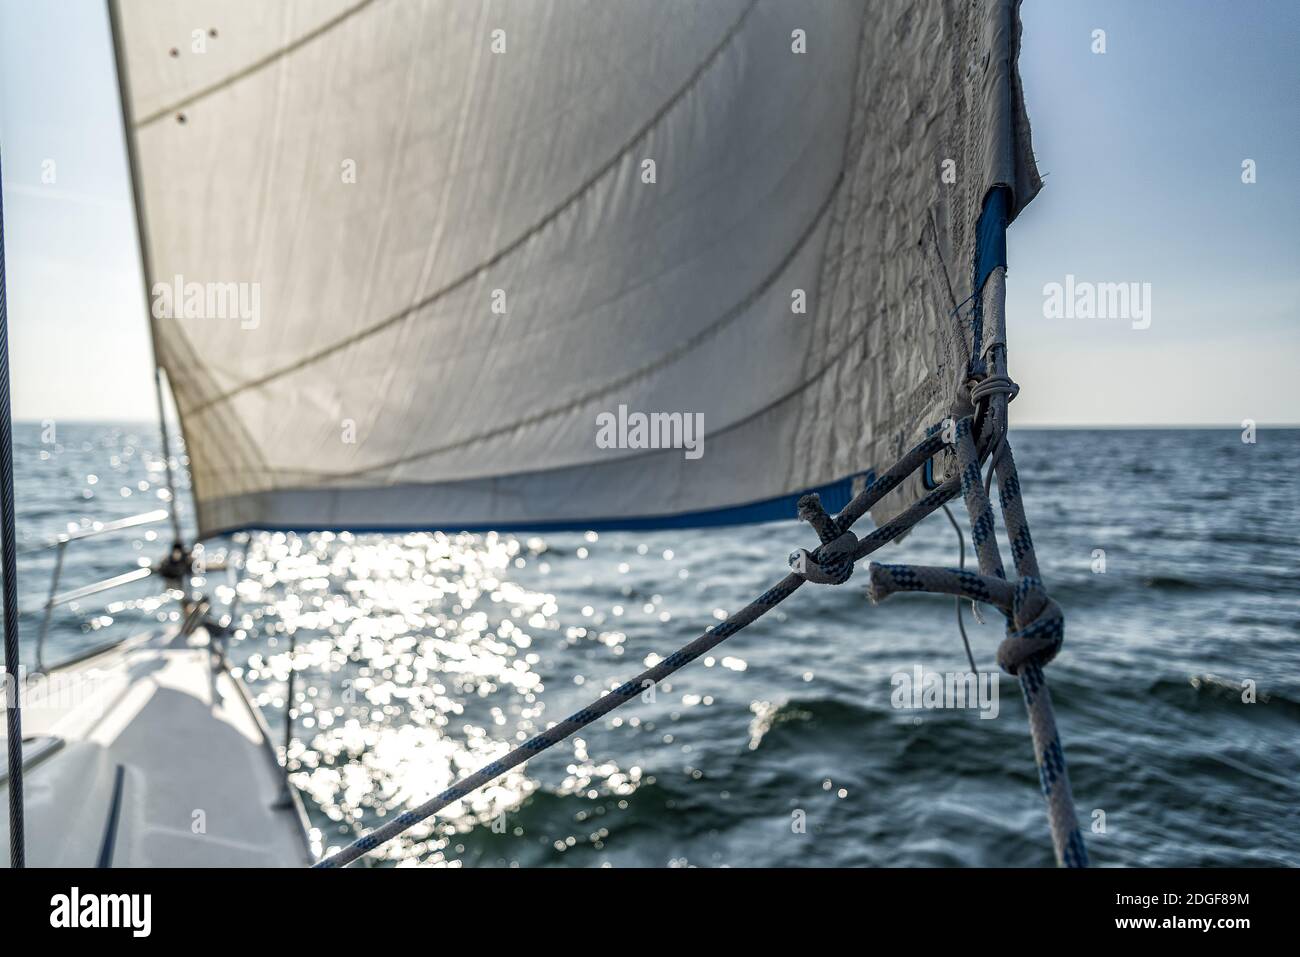 Bow of a sailing yacht Stock Photo